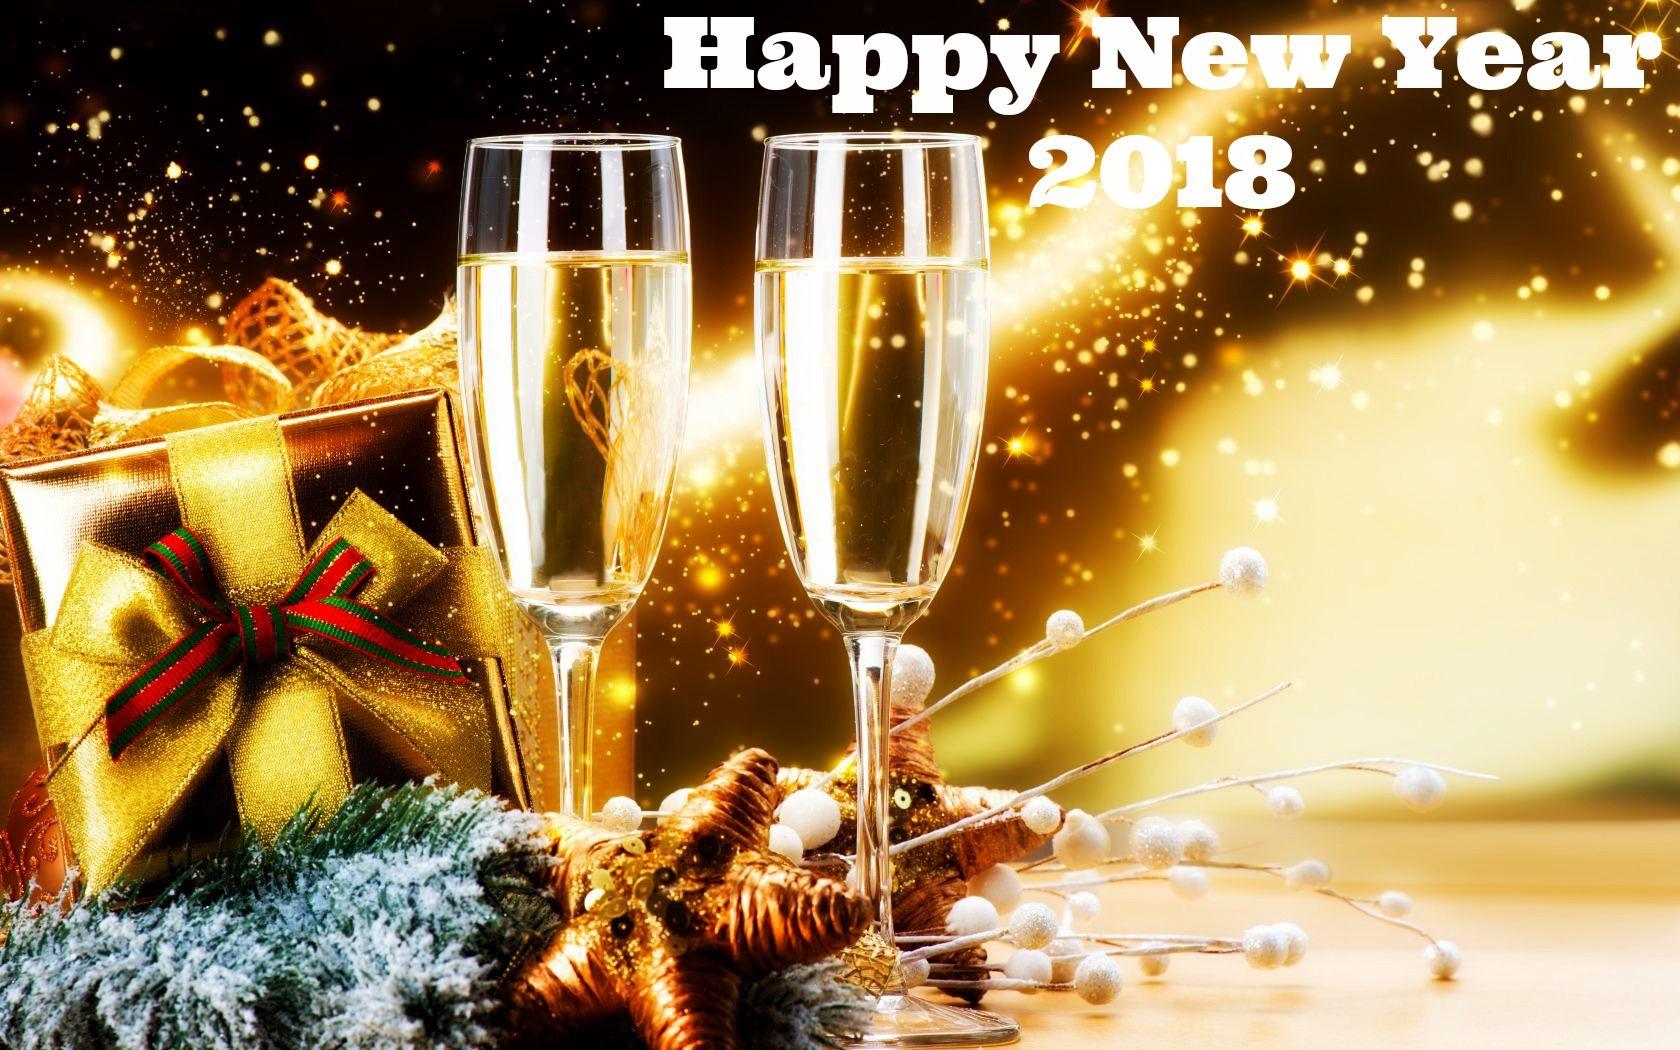 Happy New Year 2018 Wallpaper HD Quality Animated Wallpaper